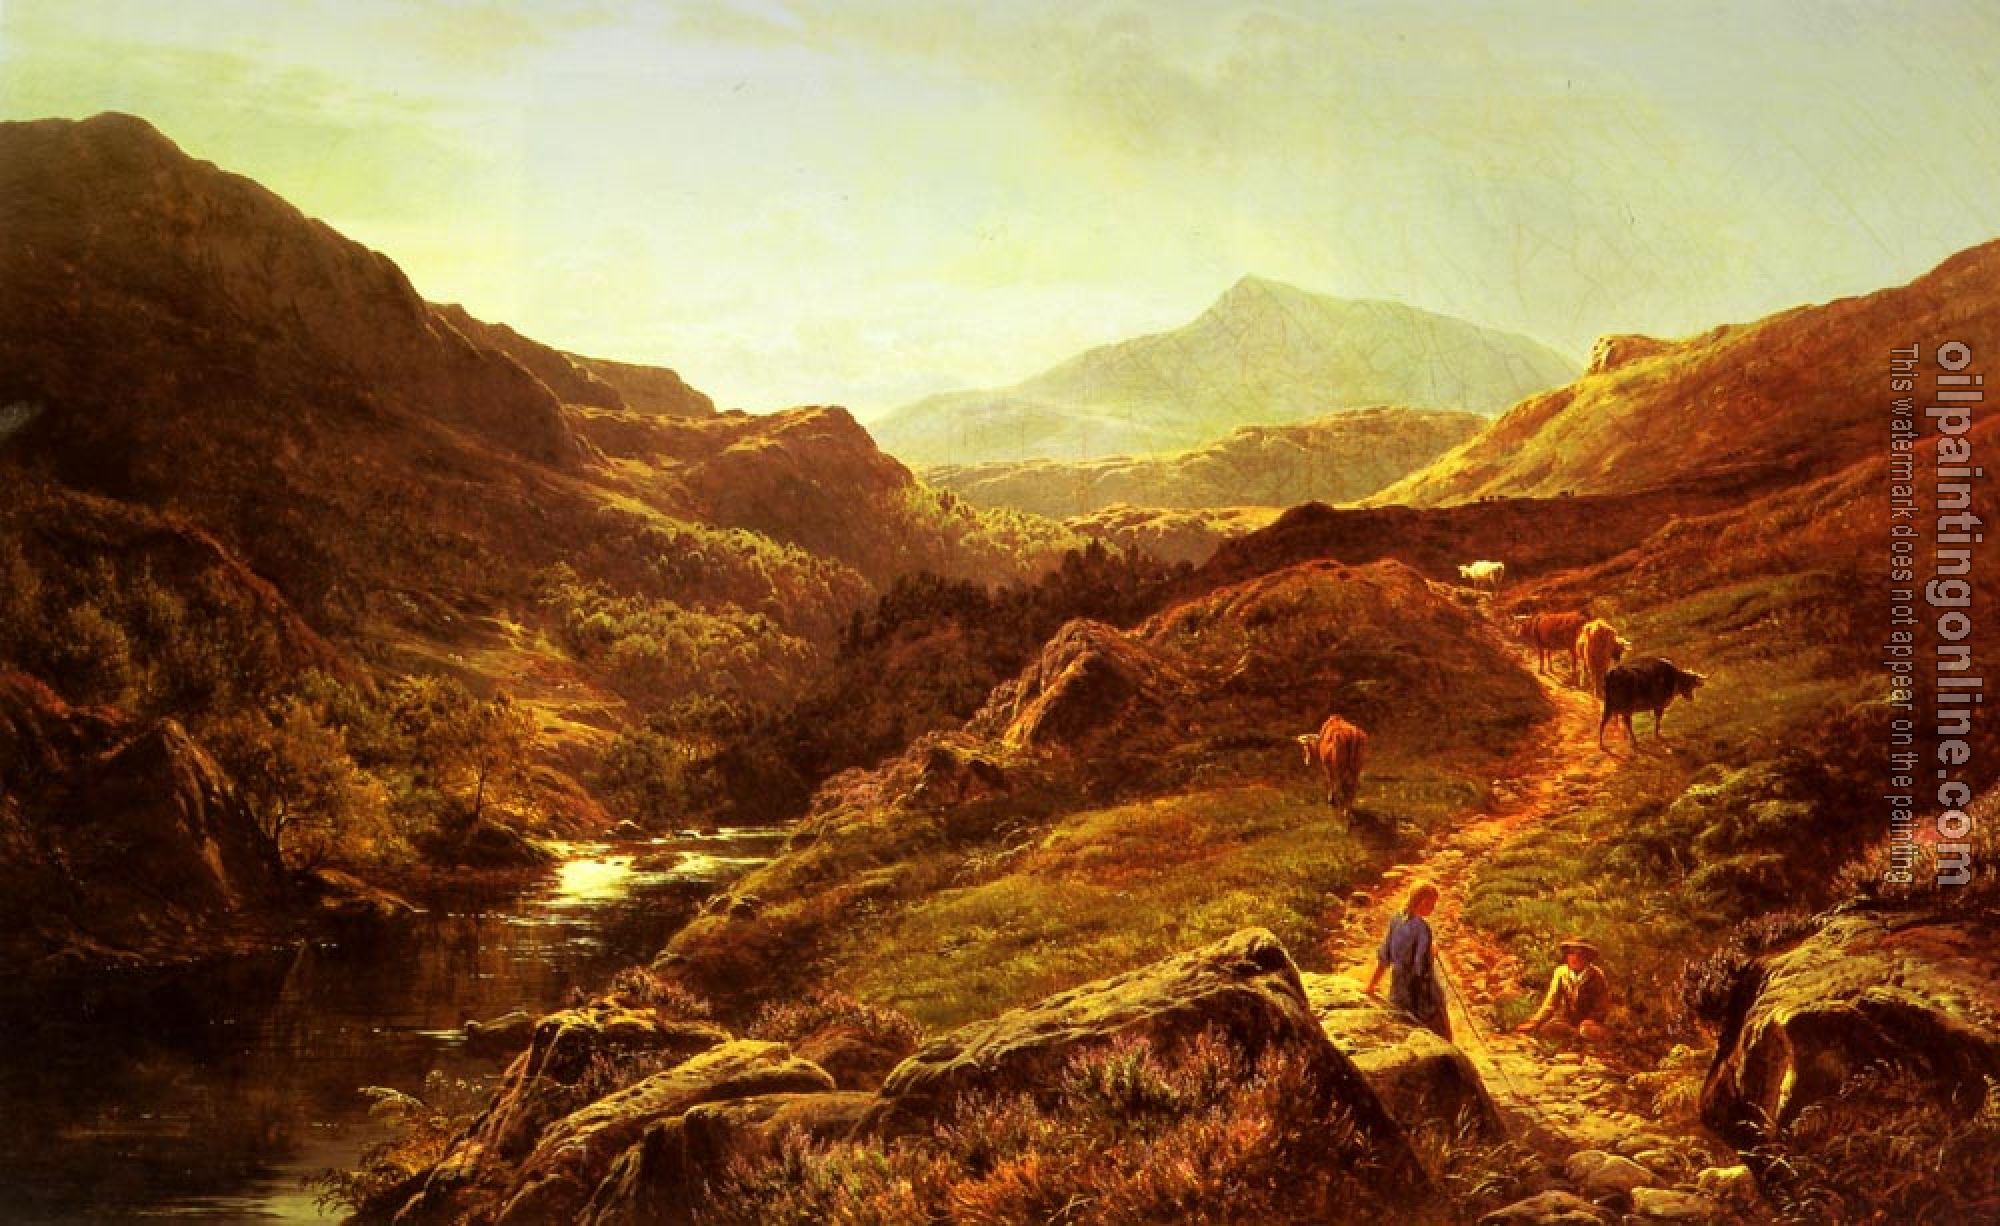 Percy, Sidney Richard - Moel Siabod from Glyn Lledr, with Figures and Cattle on a Ri